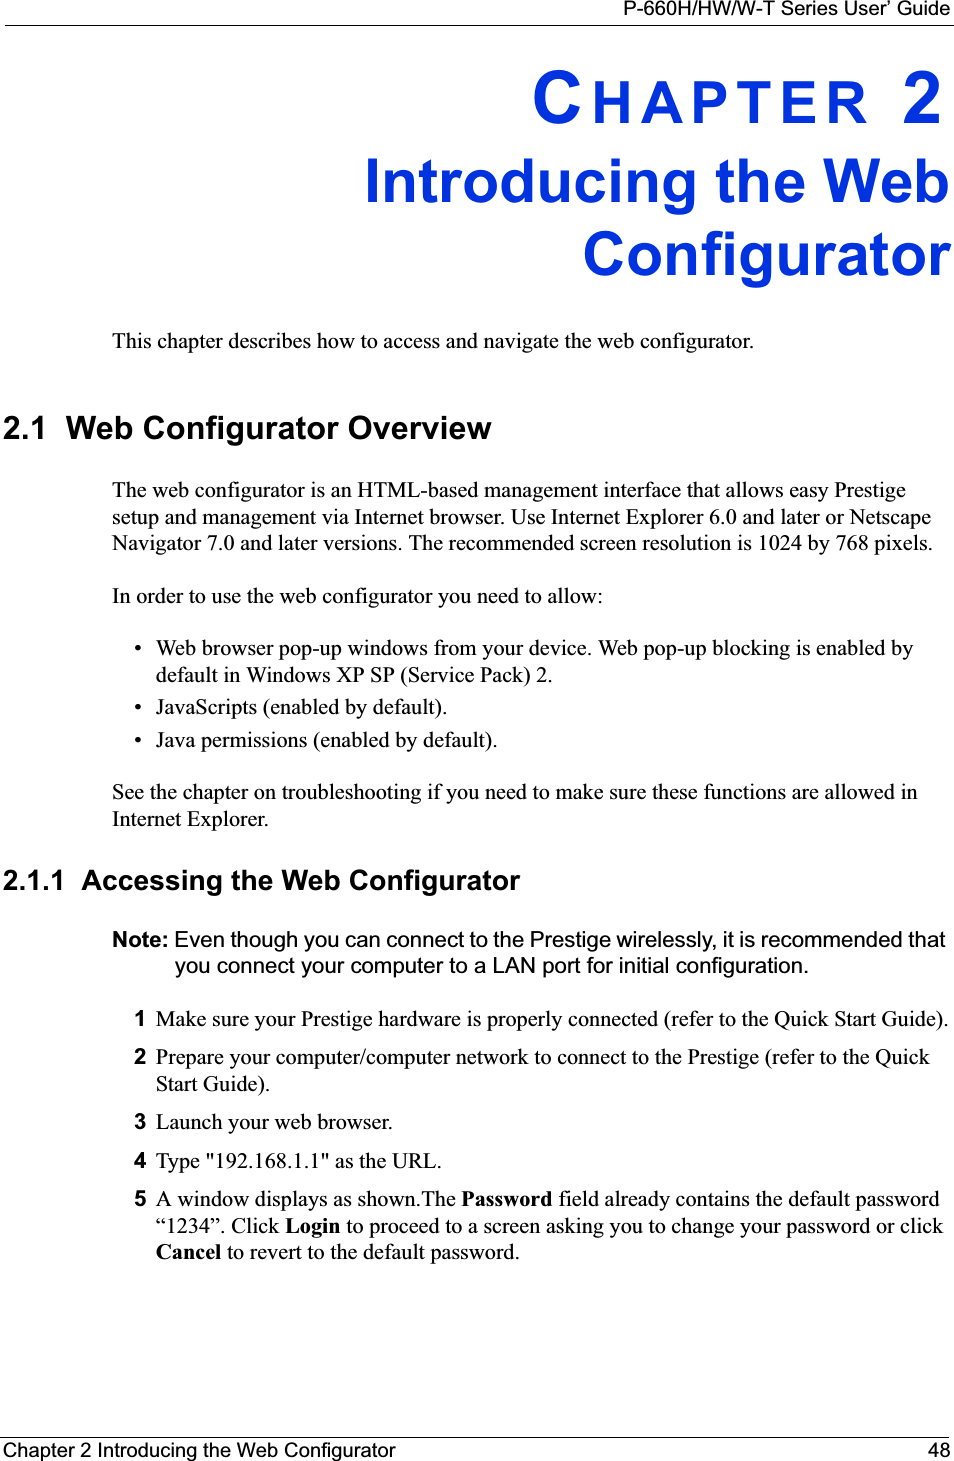 P-660H/HW/W-T Series User’ GuideChapter 2 Introducing the Web Configurator 48CHAPTER 2Introducing the WebConfiguratorThis chapter describes how to access and navigate the web configurator.2.1  Web Configurator OverviewThe web configurator is an HTML-based management interface that allows easy Prestige setup and management via Internet browser. Use Internet Explorer 6.0 and later or Netscape Navigator 7.0 and later versions. The recommended screen resolution is 1024 by 768 pixels.In order to use the web configurator you need to allow:• Web browser pop-up windows from your device. Web pop-up blocking is enabled by default in Windows XP SP (Service Pack) 2.• JavaScripts (enabled by default).• Java permissions (enabled by default).See the chapter on troubleshooting if you need to make sure these functions are allowed in Internet Explorer.2.1.1  Accessing the Web Configurator Note: Even though you can connect to the Prestige wirelessly, it is recommended that you connect your computer to a LAN port for initial configuration.1Make sure your Prestige hardware is properly connected (refer to the Quick Start Guide).2Prepare your computer/computer network to connect to the Prestige (refer to the Quick Start Guide).3Launch your web browser.4Type &quot;192.168.1.1&quot; as the URL.5A window displays as shown.The Password field already contains the default password “1234”. Click Login to proceed to a screen asking you to change your password or click Cancel to revert to the default password.